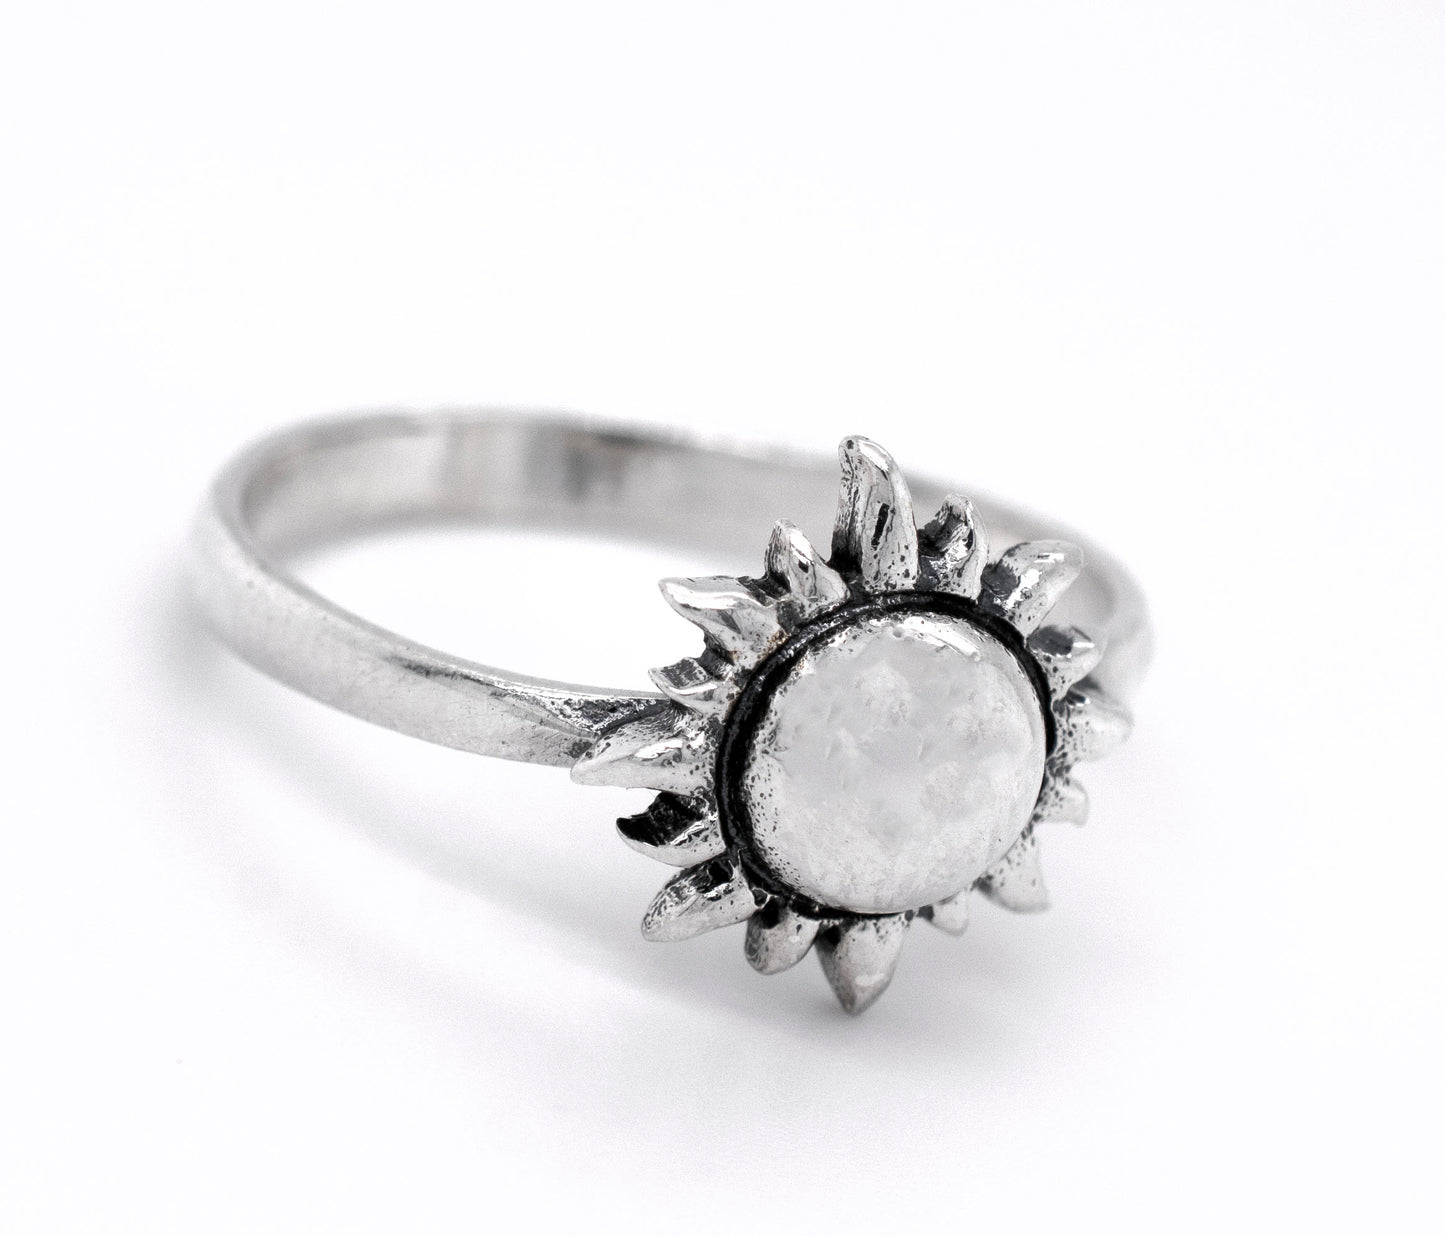 A minimalist style Super Silver  Silver Sun Ring with a white stone in the center.